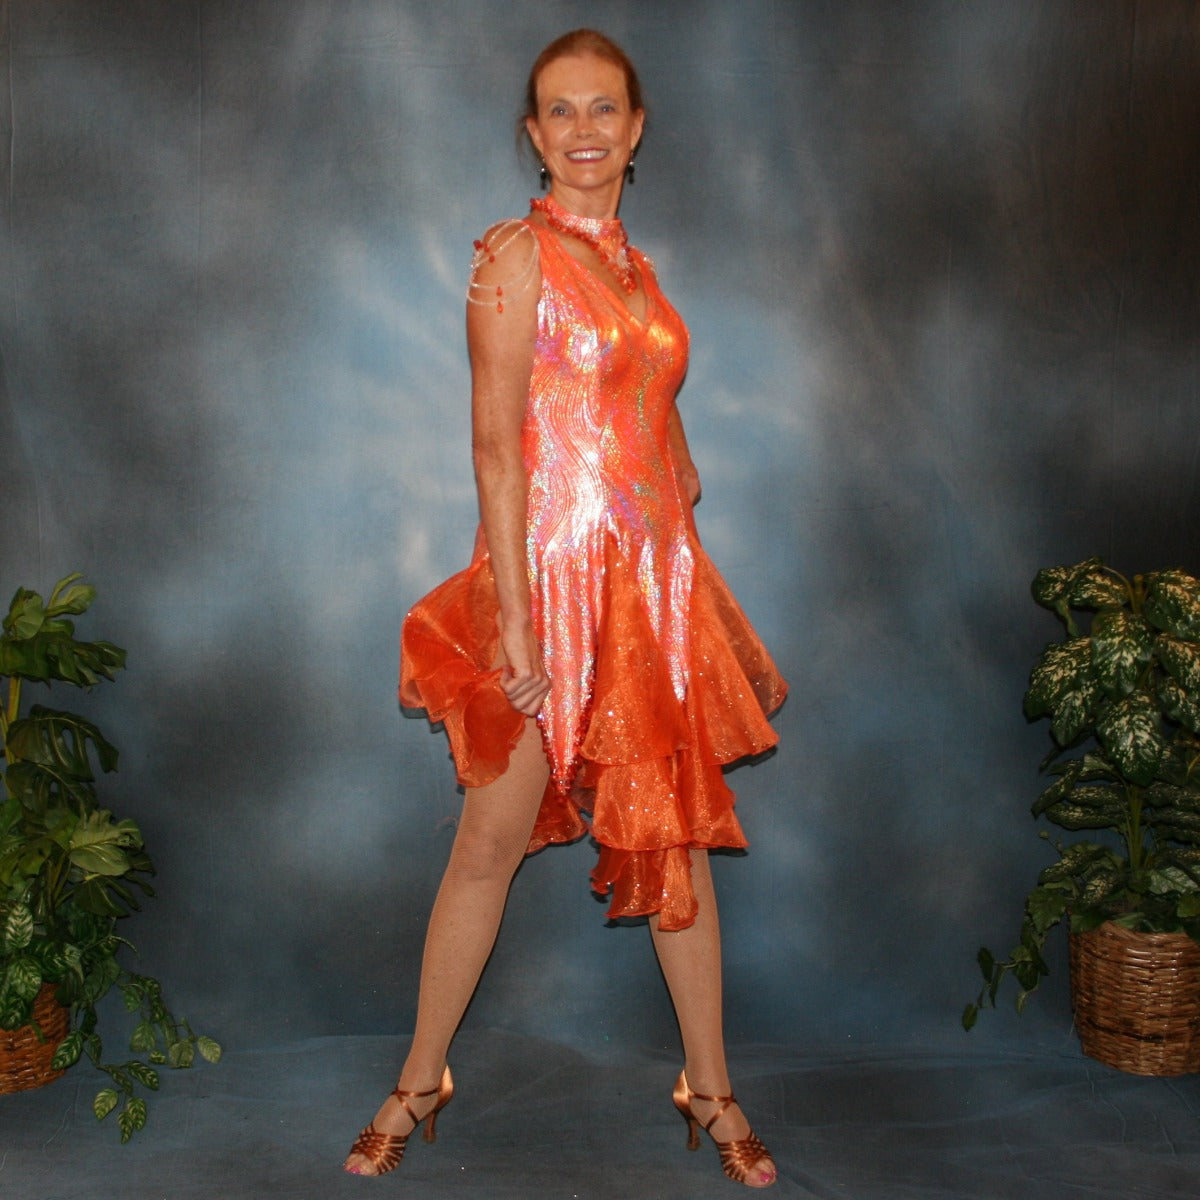 Crystal's Creations Orange Latin/rhythm dress was created in orange & silver metallic print lycra with oodles of glitter organza flounces & accents, has back strap detailing, embellished with extensive Swarovski hand beading & has matching Swarovski hand beaded neckpiece.